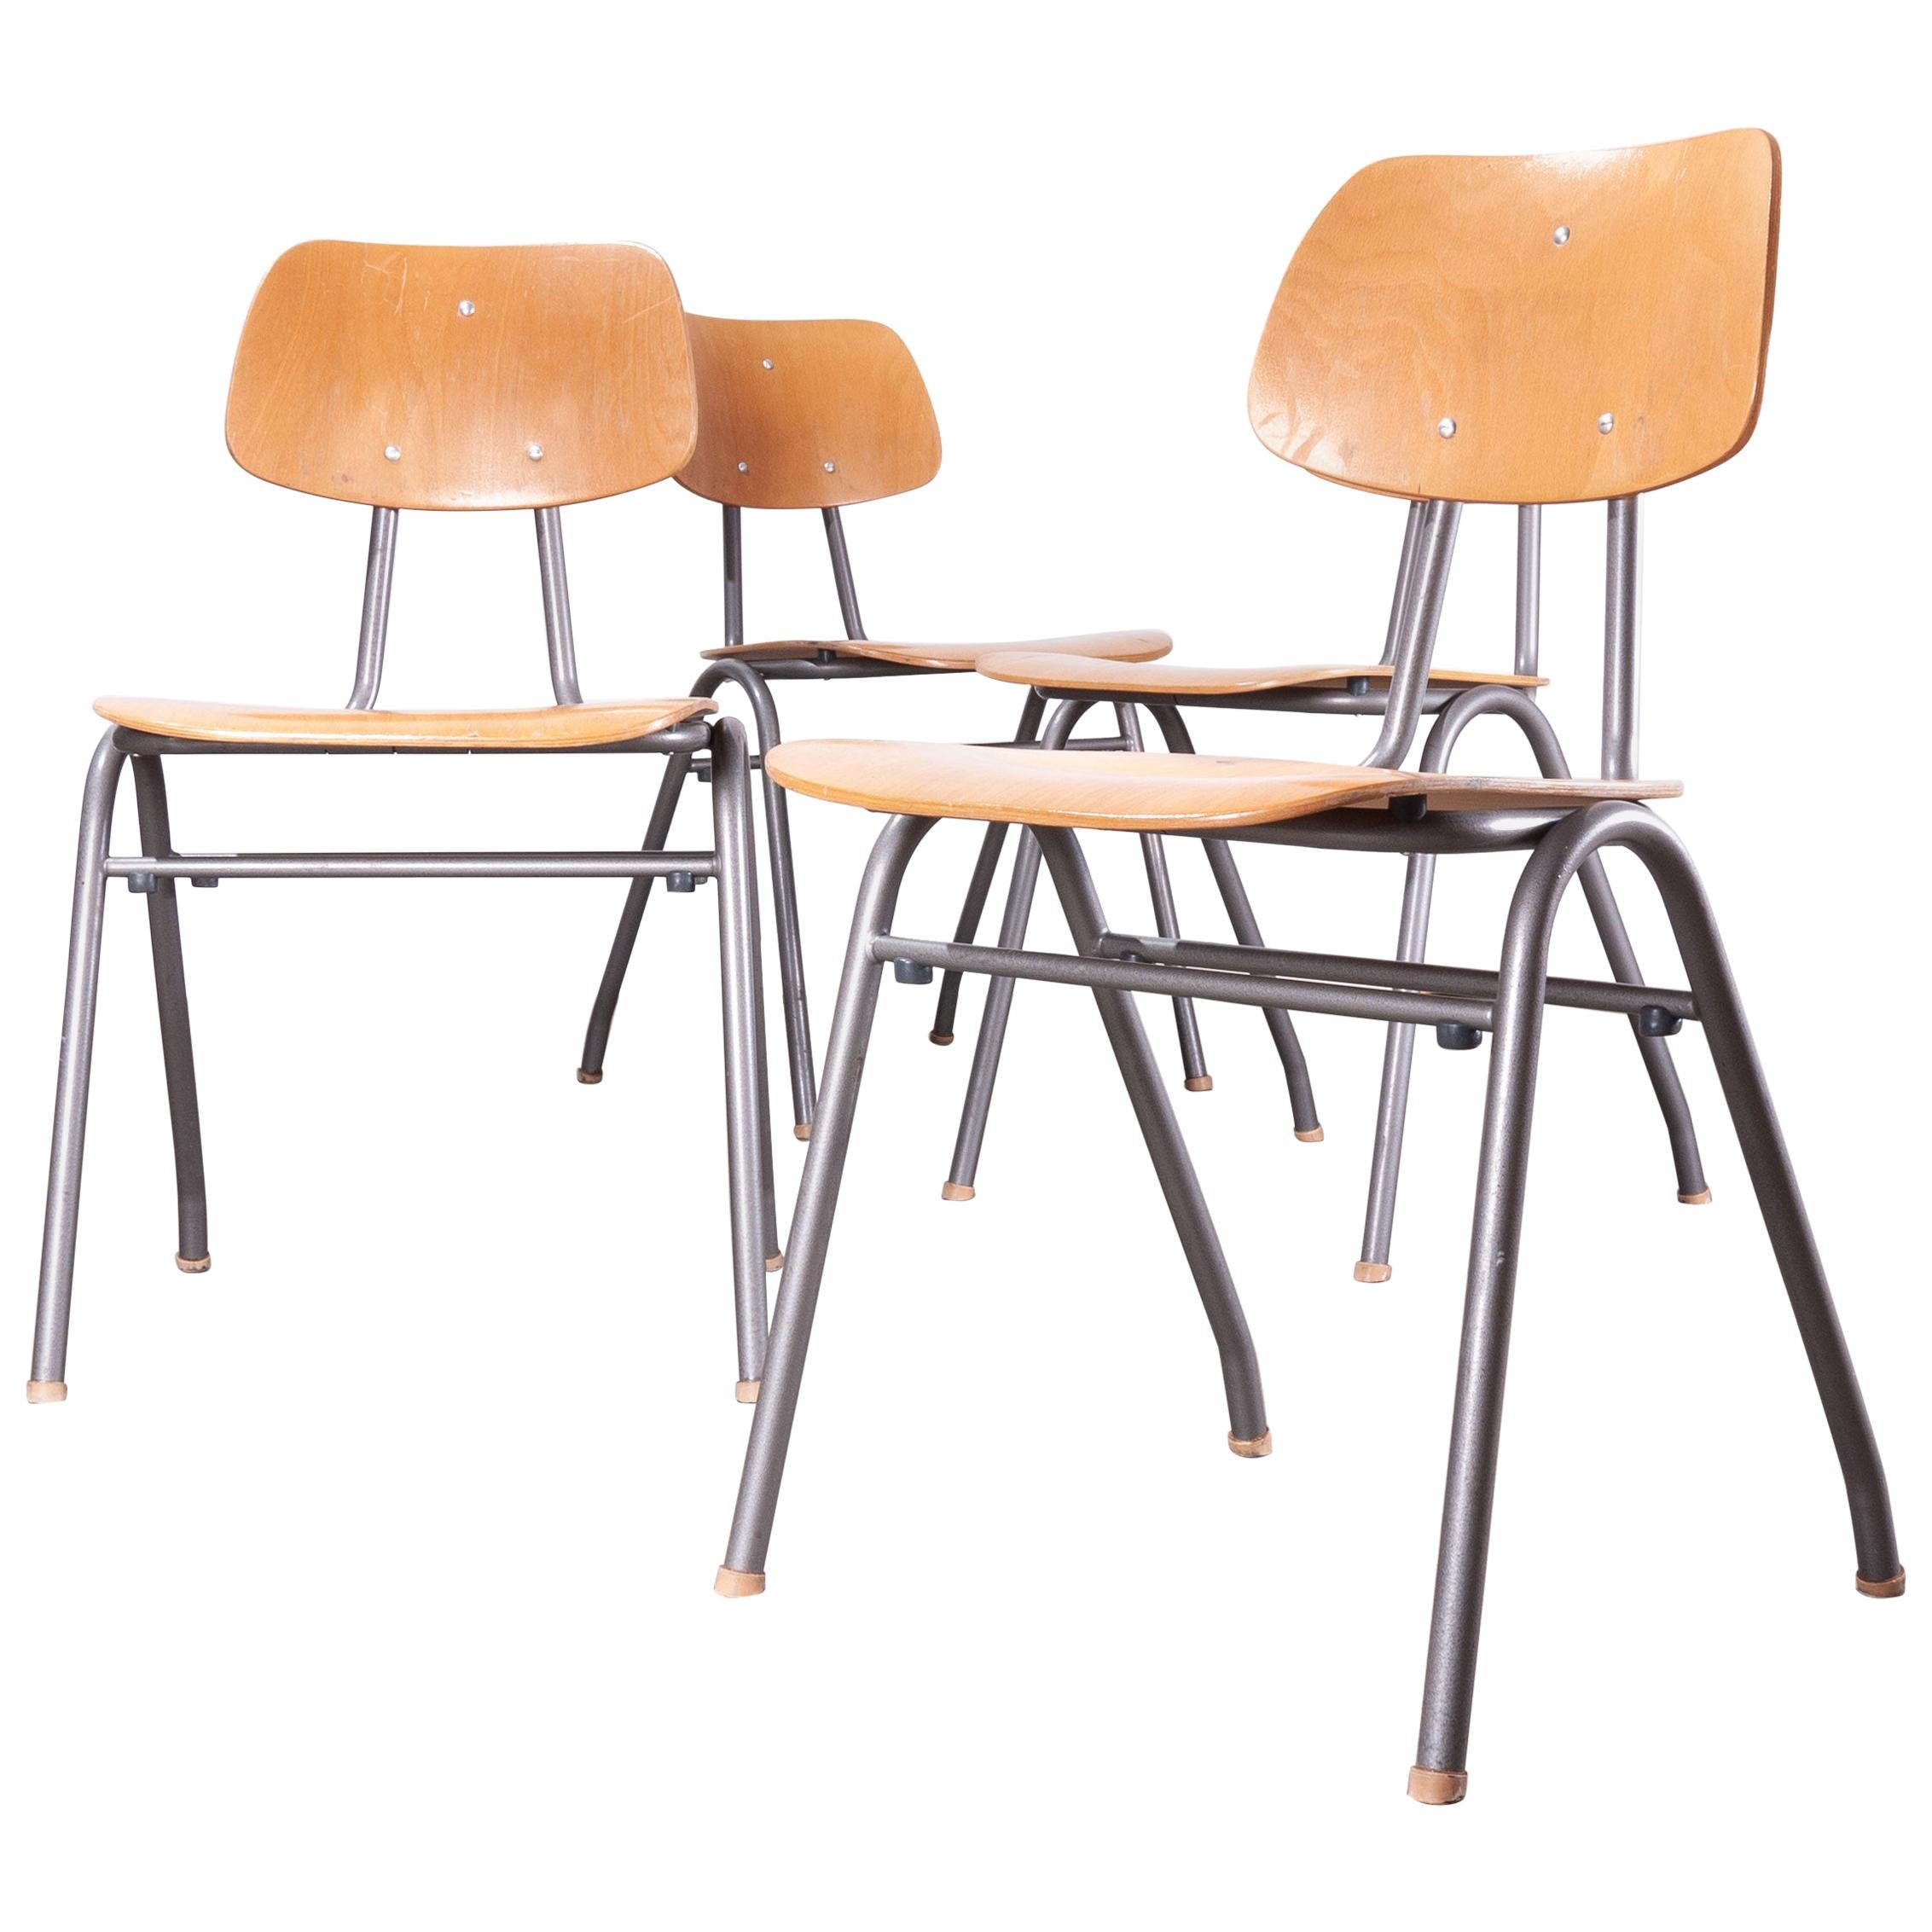 1960s Dining School/University Chairs, Set of Four